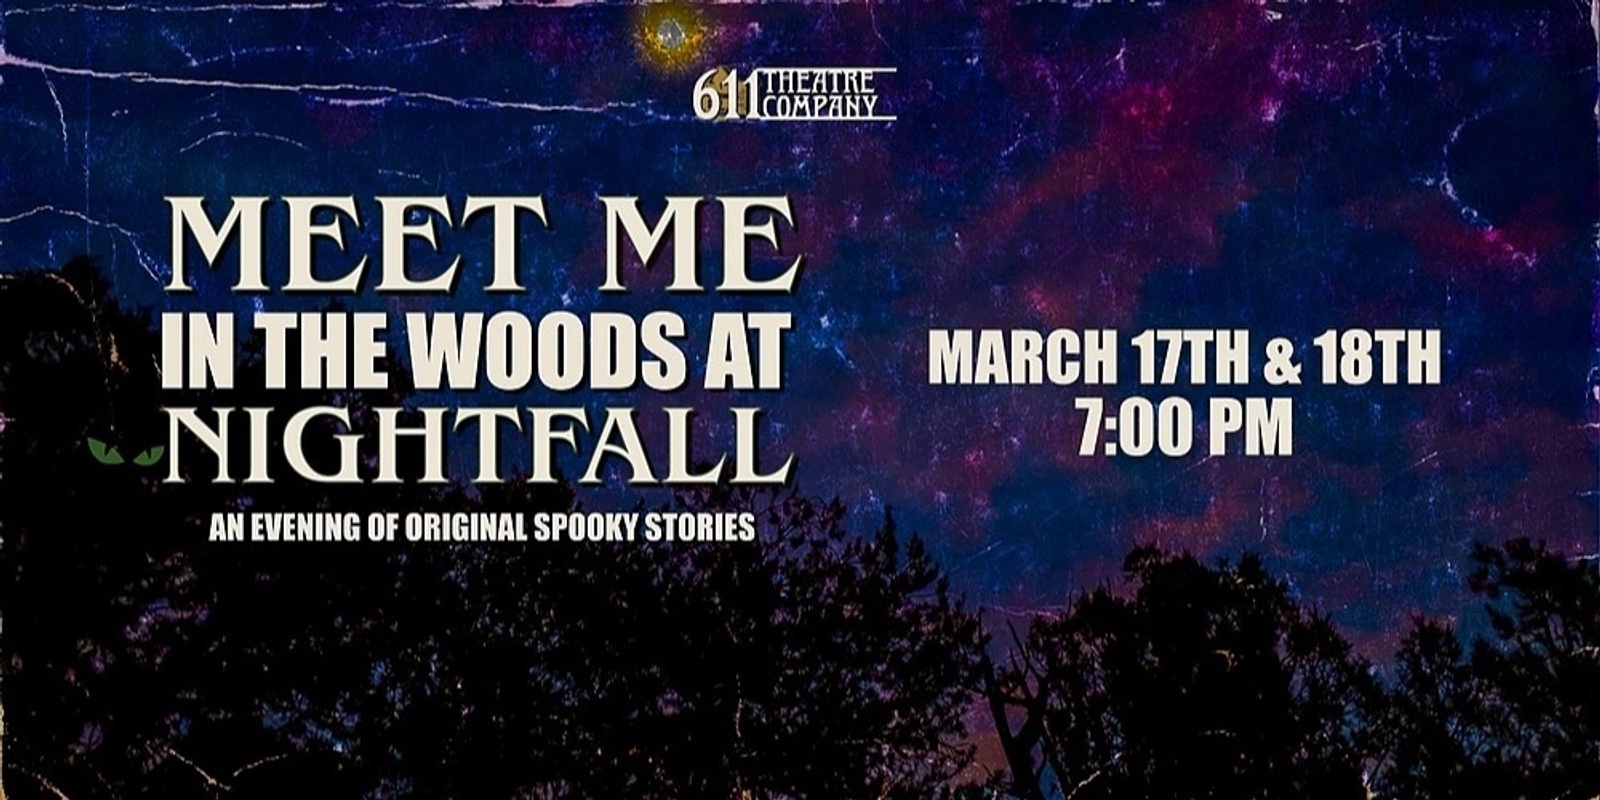 MEET ME IN THE WOODS AT NIGHTFALL: An Evening of Original Spooky Stories